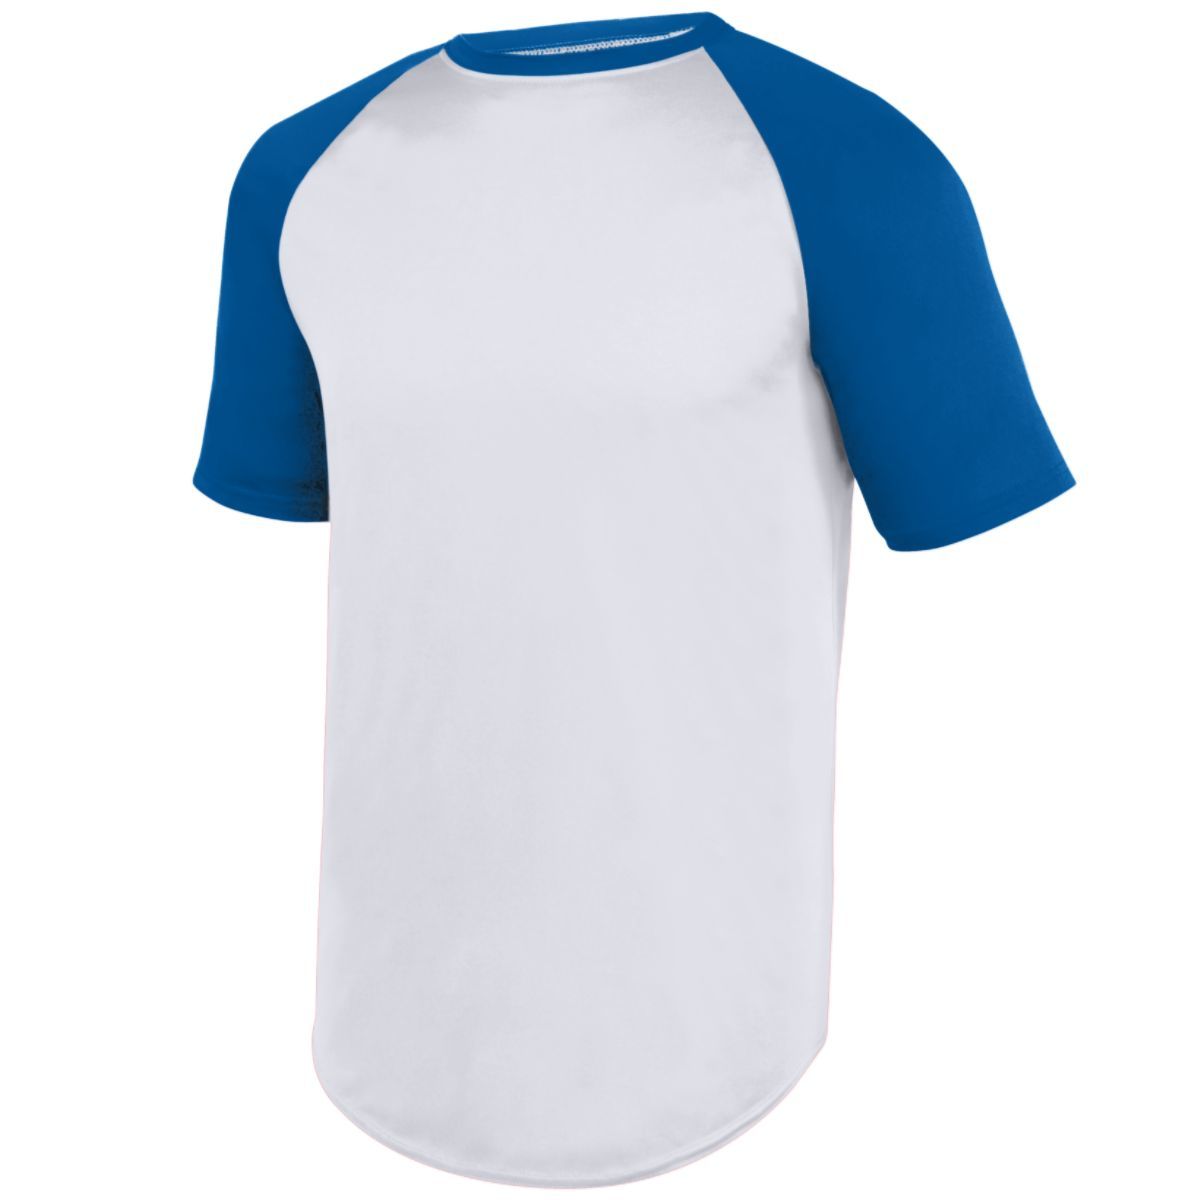 Augusta Sportswear Wicking Short Sleeve Baseball Jersey in White/Royal  -Part of the Adult, Adult-Jersey, Augusta-Products, Baseball, Shirts, All-Sports, All-Sports-1 product lines at KanaleyCreations.com